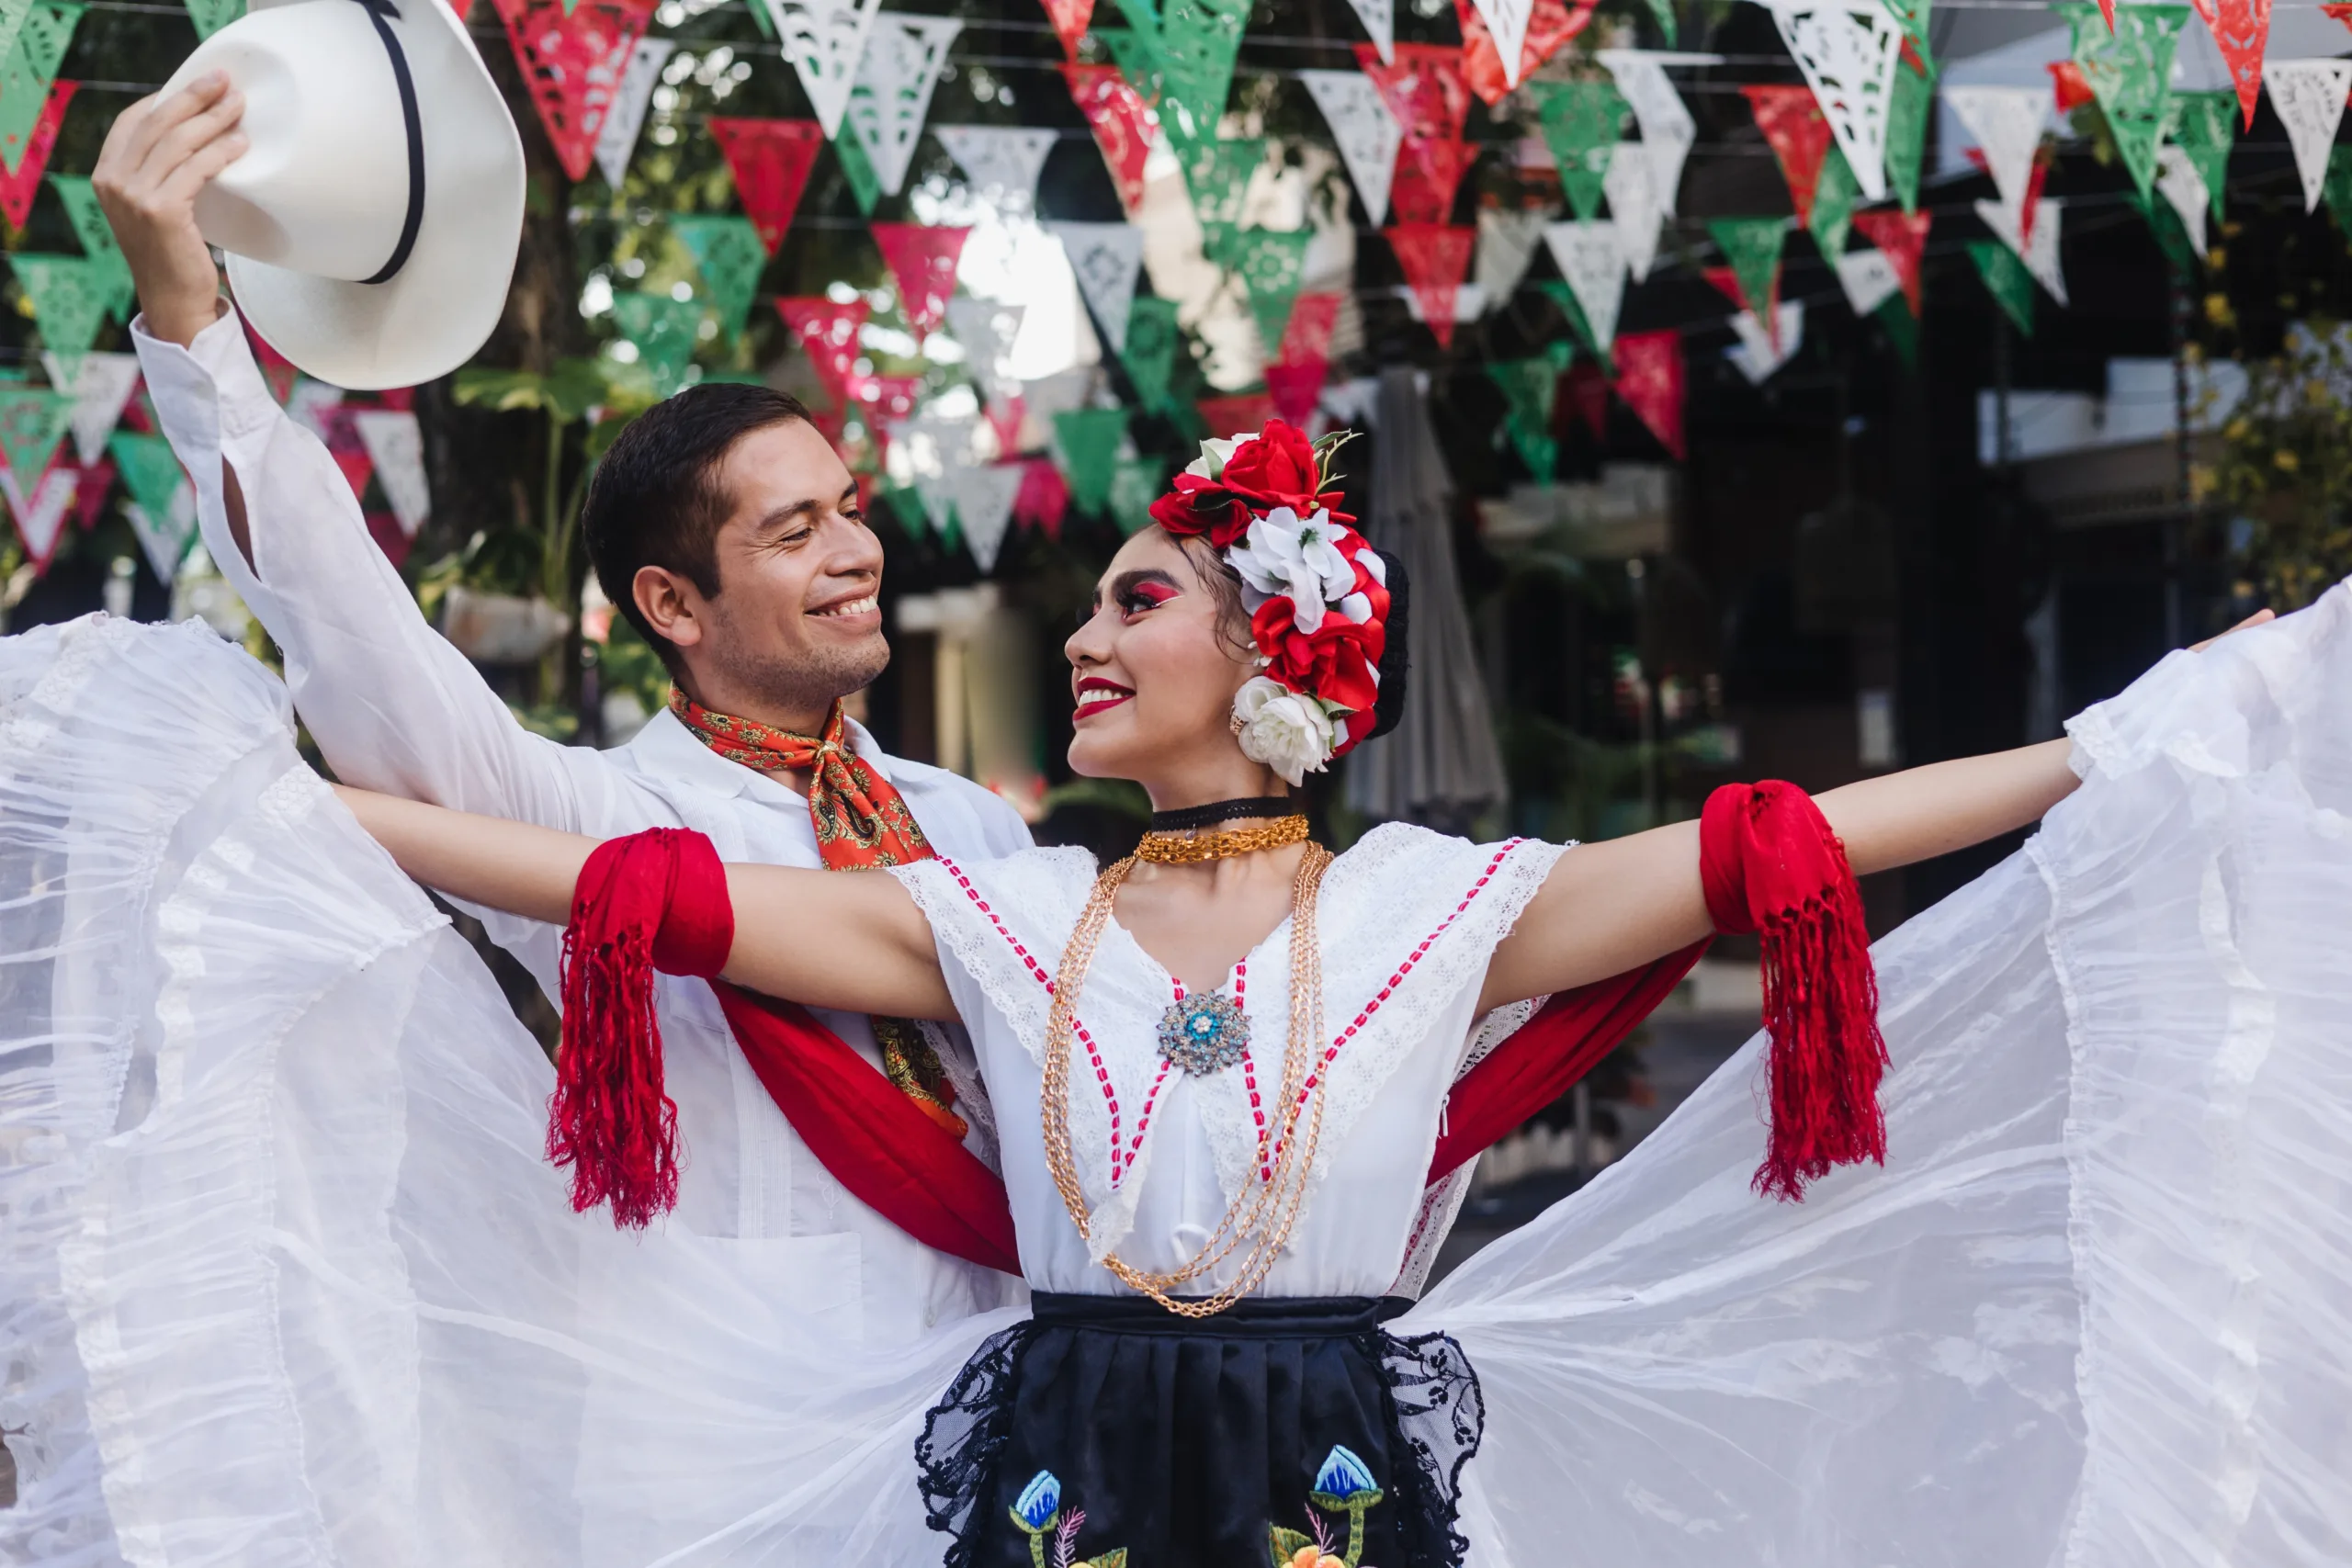 Latin,Couple,Of,Dancers,Wearing,Traditional,Mexican,Dress,From,Veracruz